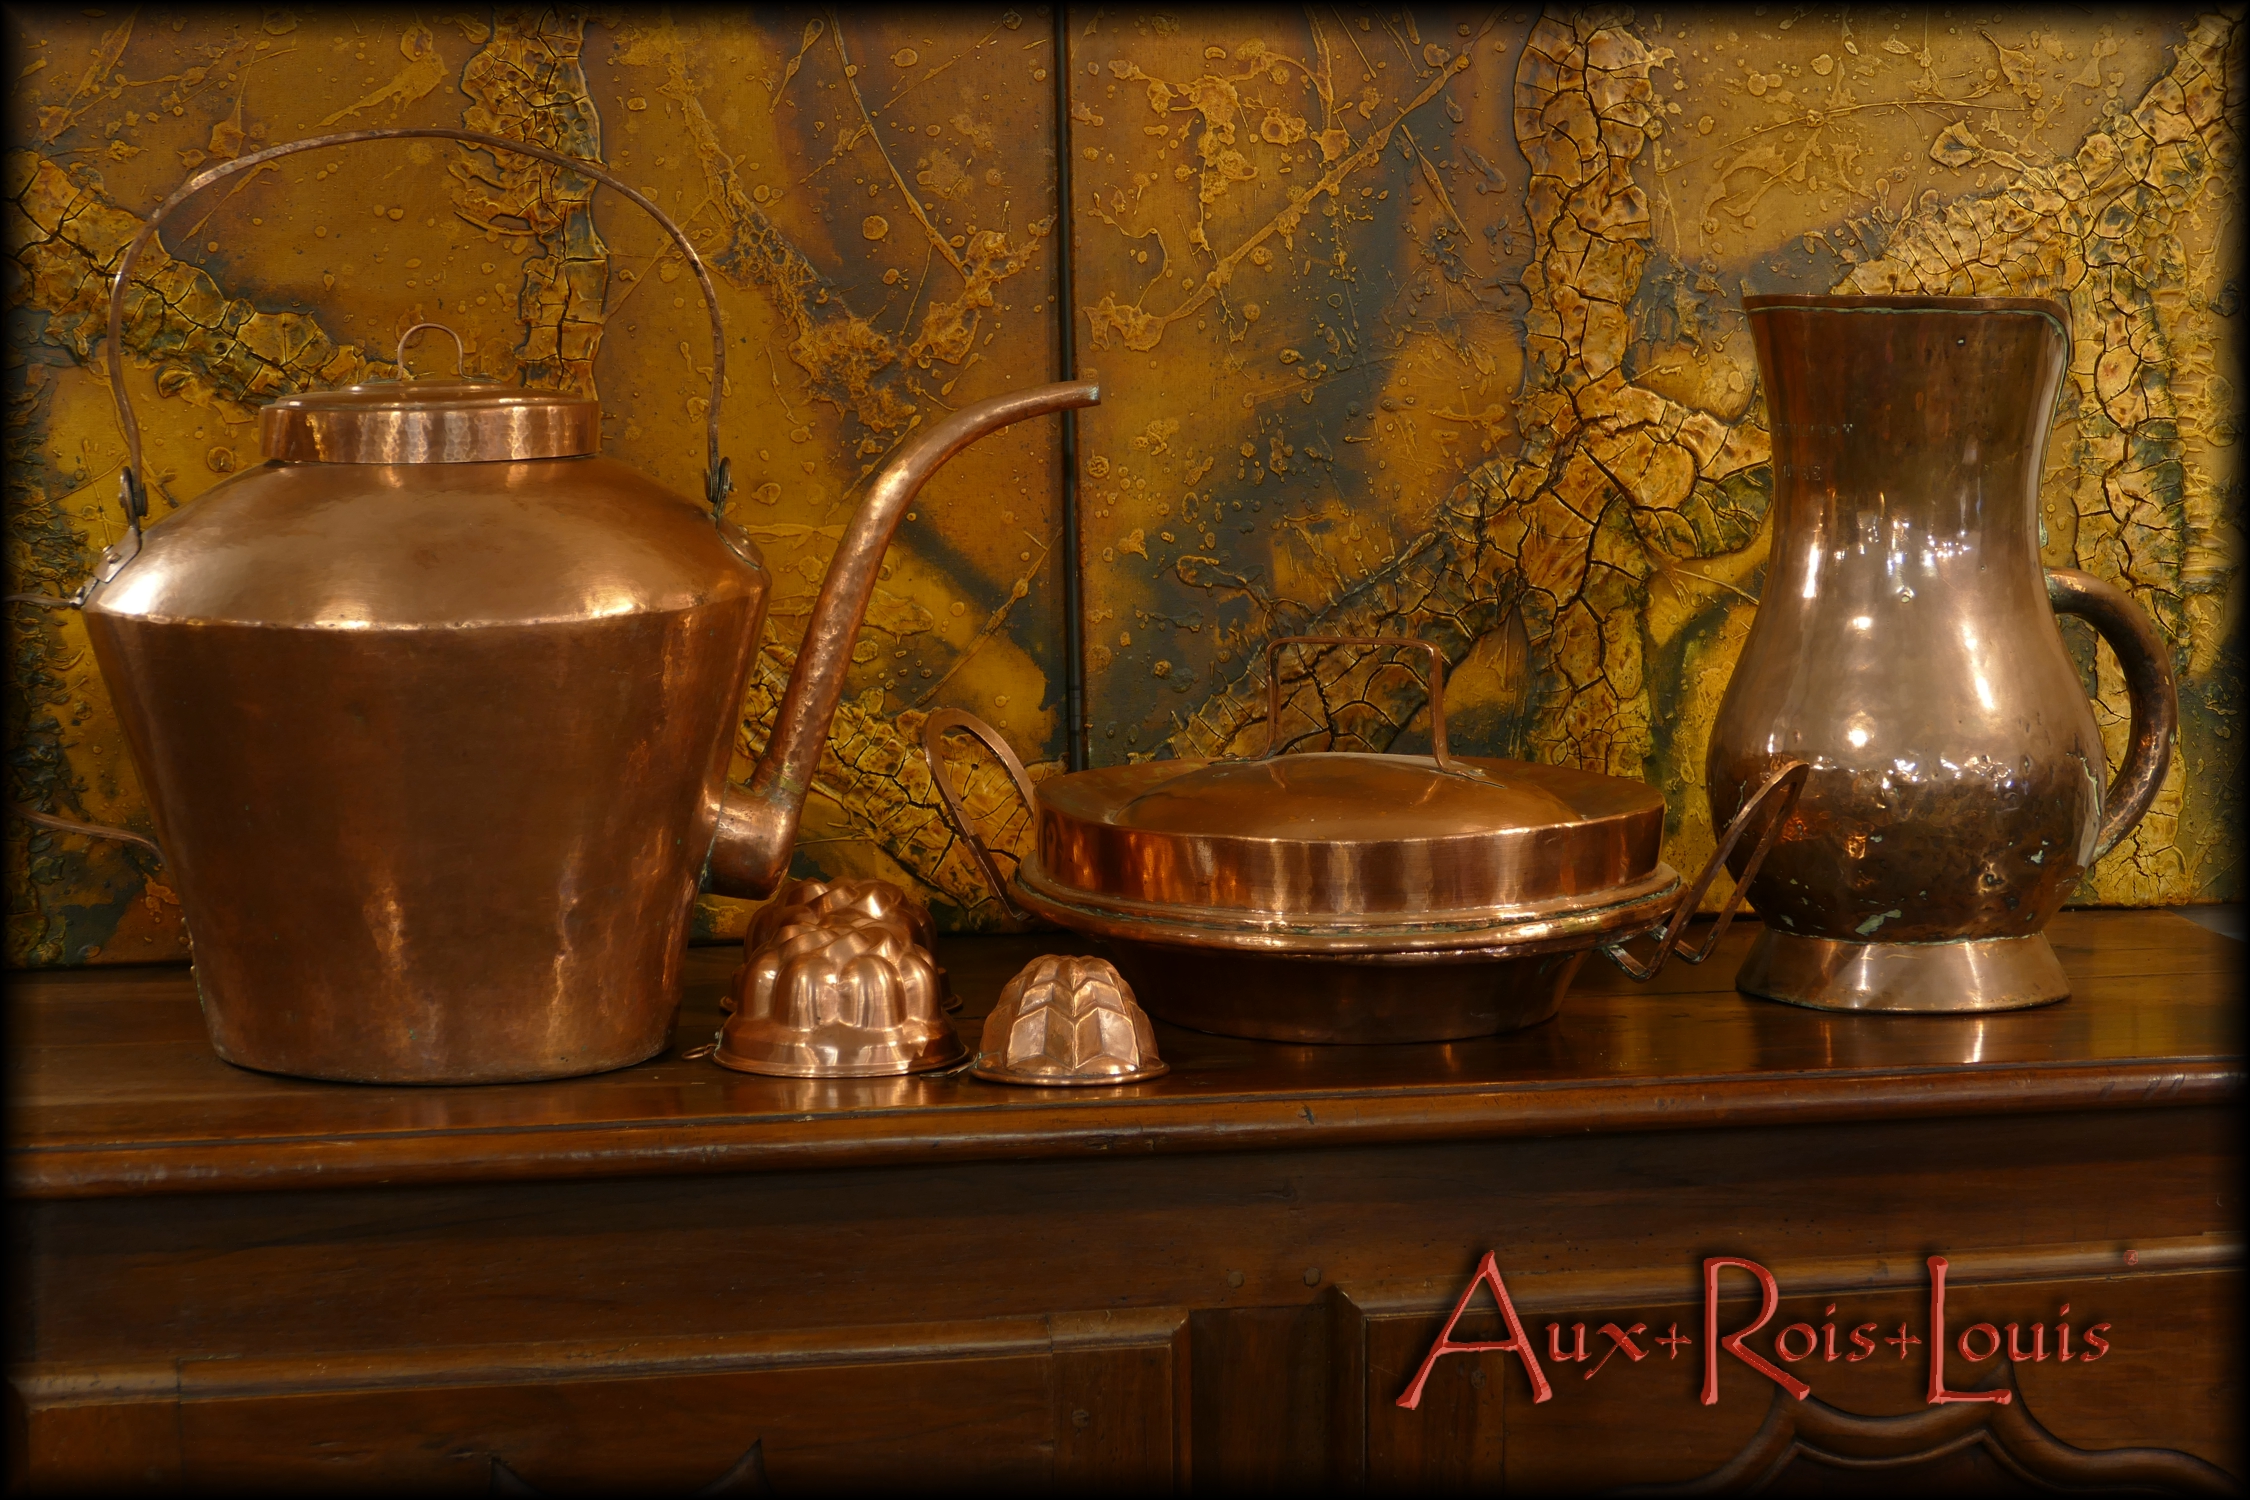 Three copper containers of exceptional size: an enormous kettle, the matching pie dish and an equally imposing pitcher. All are in red copper and date from the 18th century, a period during which they were manufactured using the same processes in the South West of France.